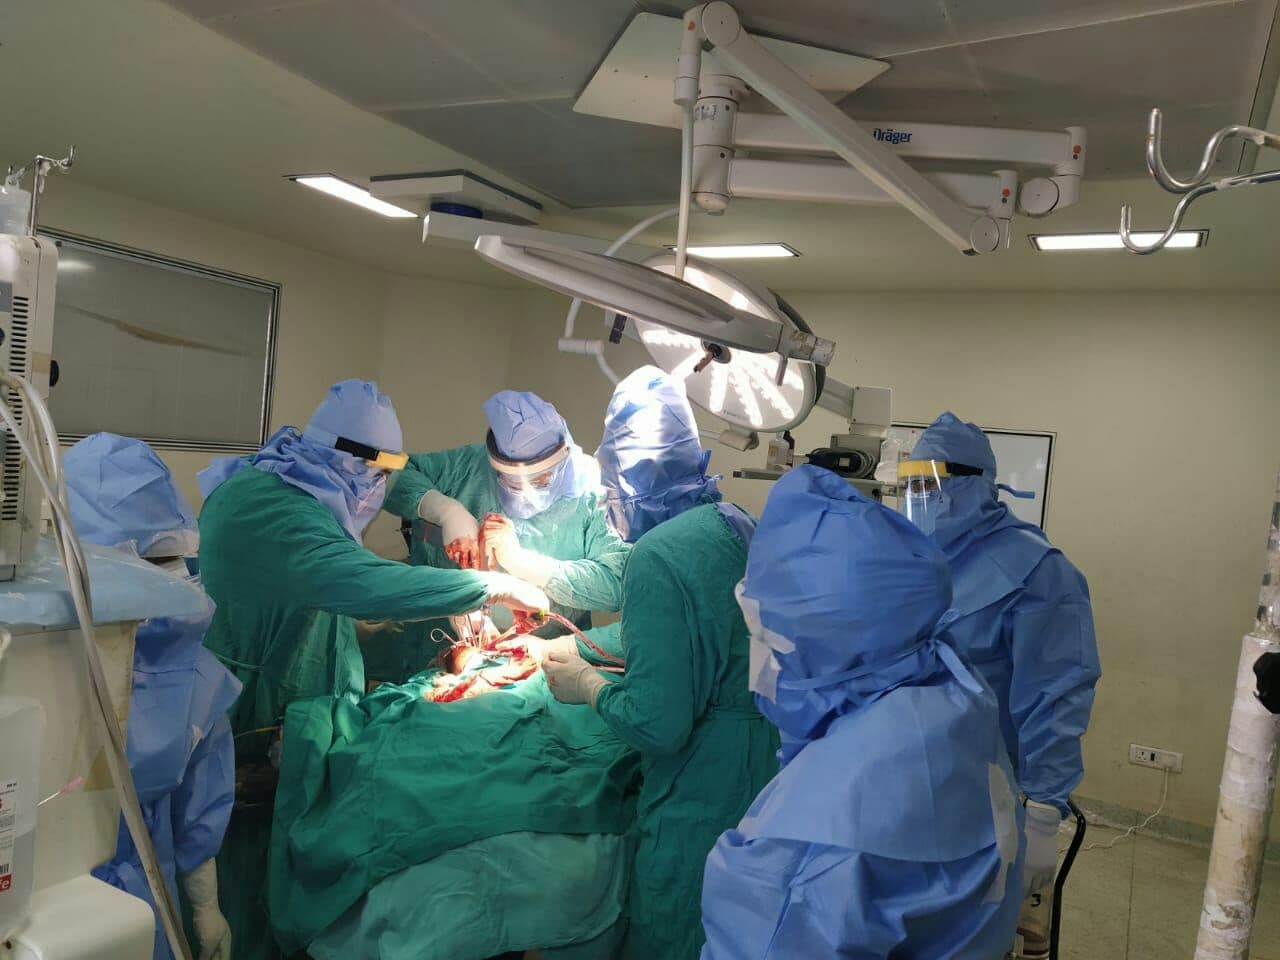 operation theater , file pic 